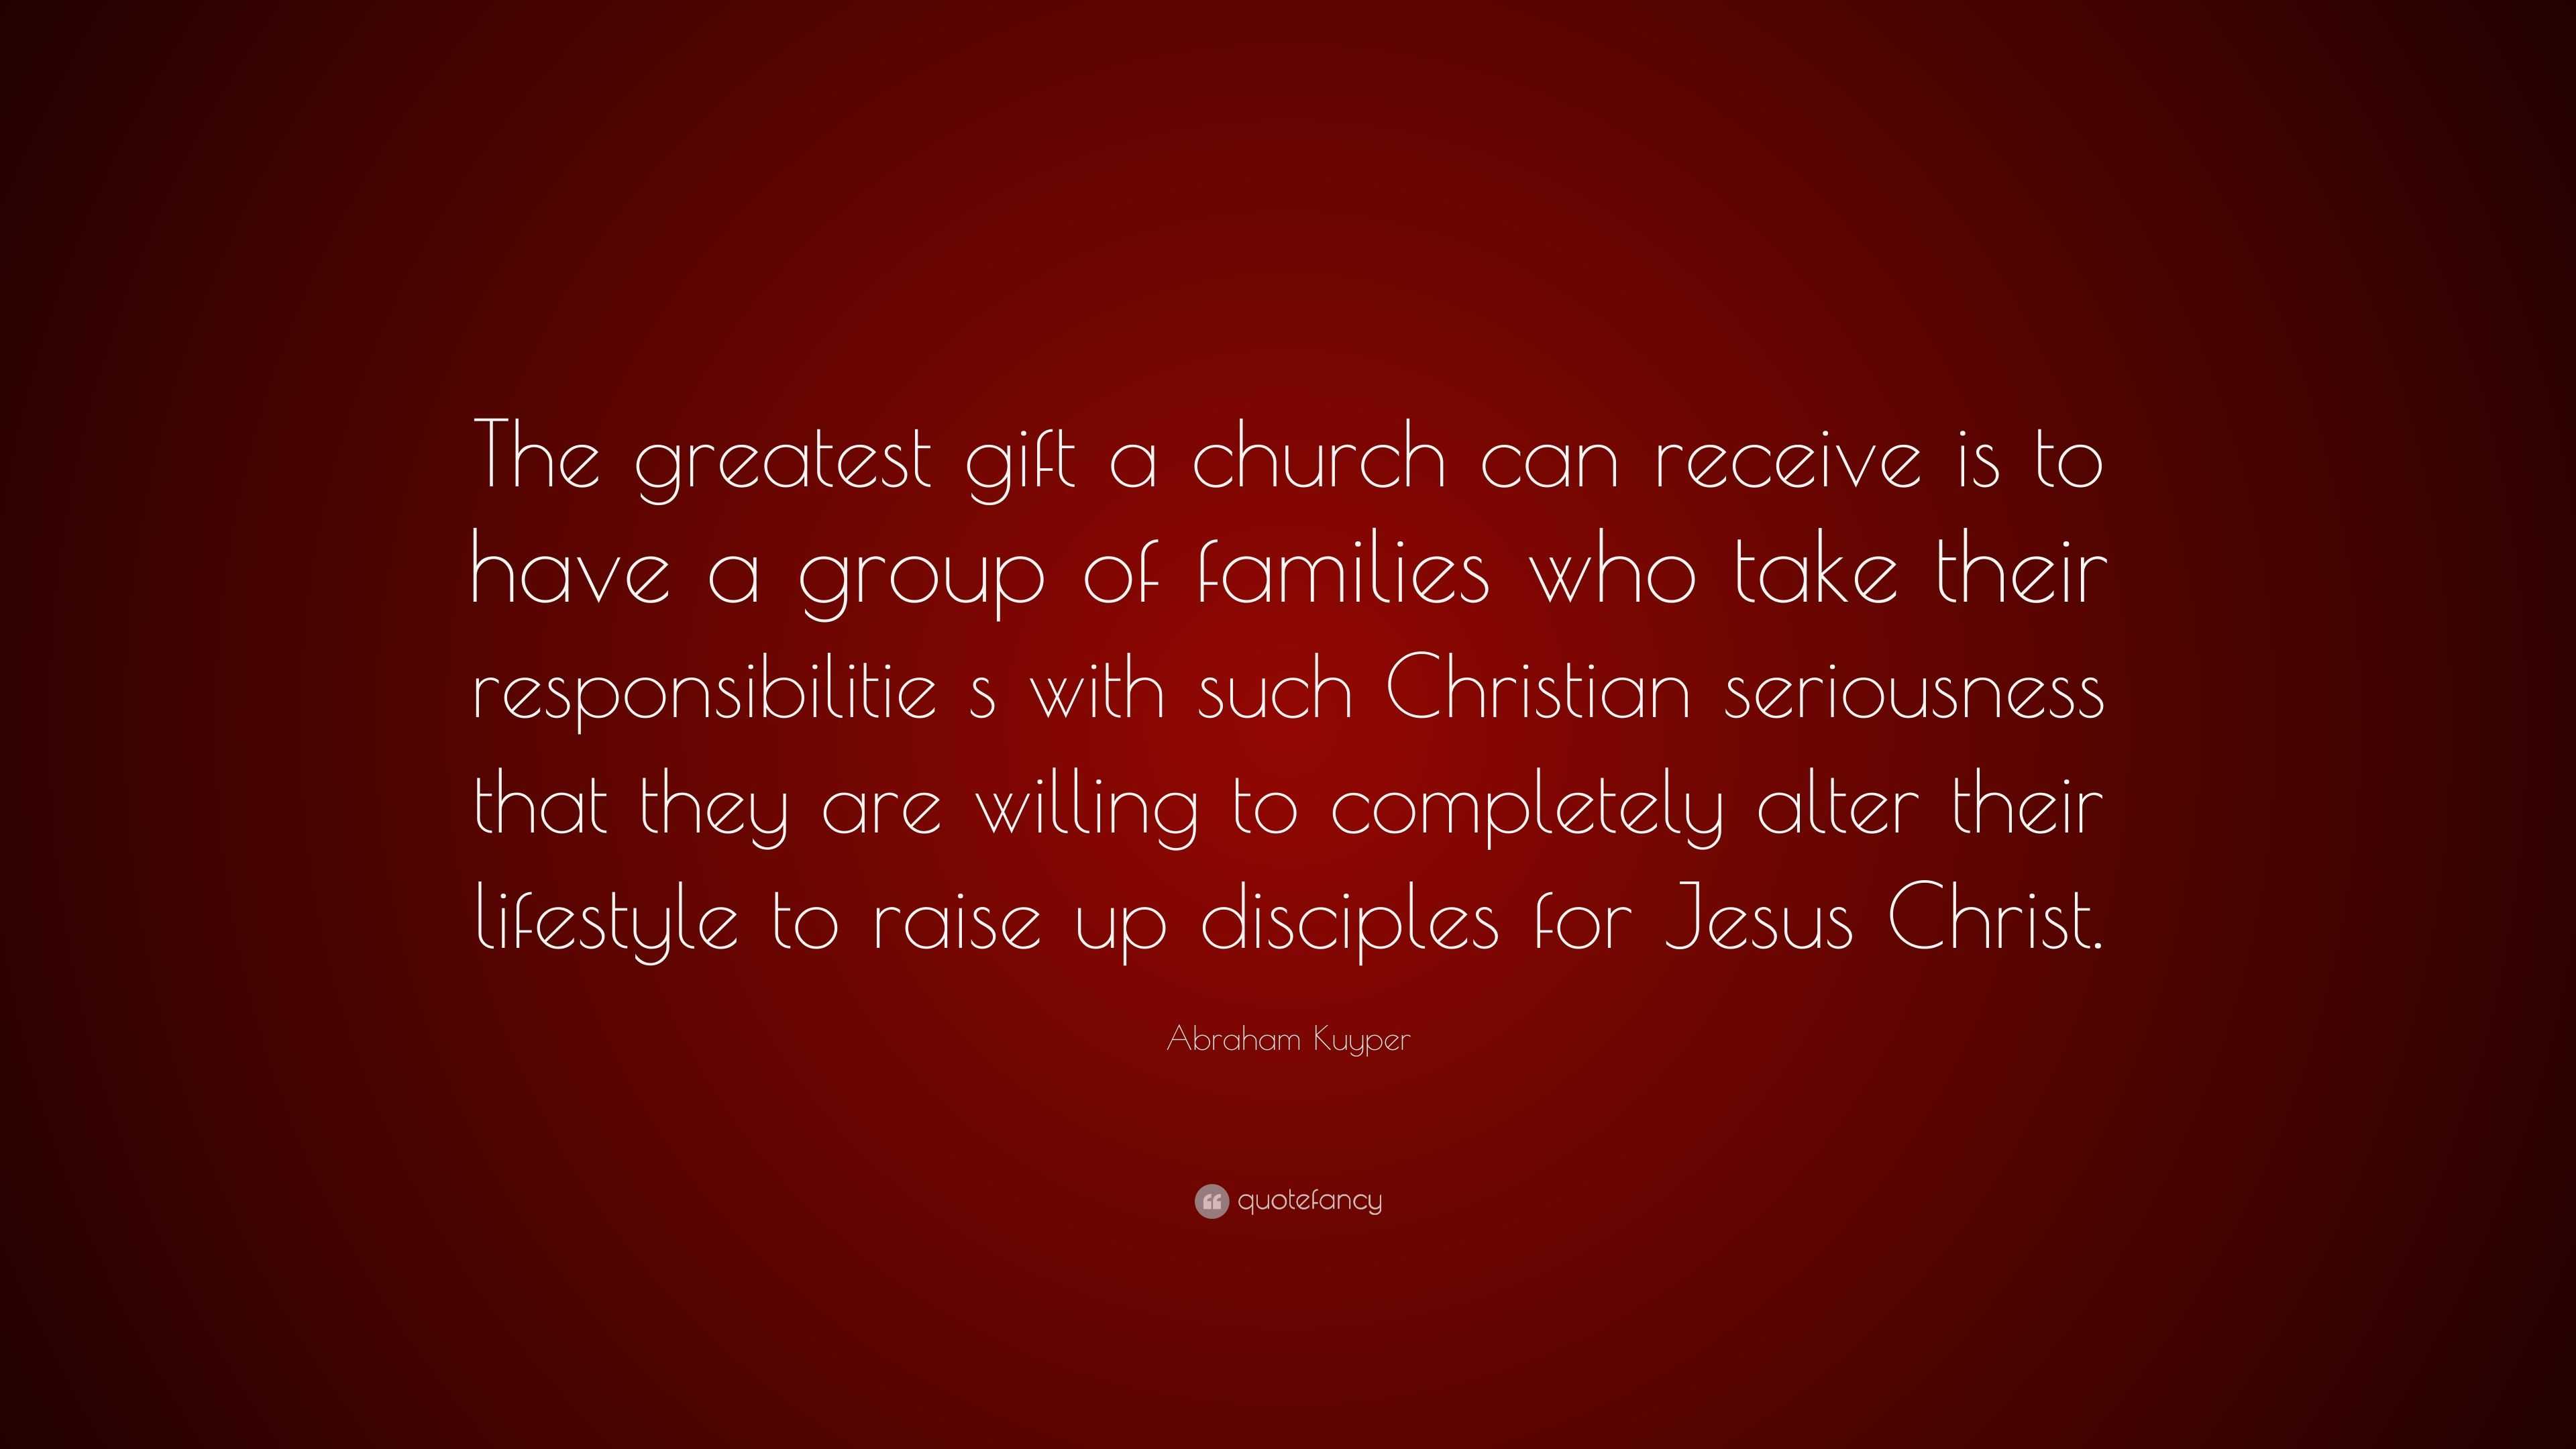 The Gifts of Jesus Christ: A Christmas Message - YouTube